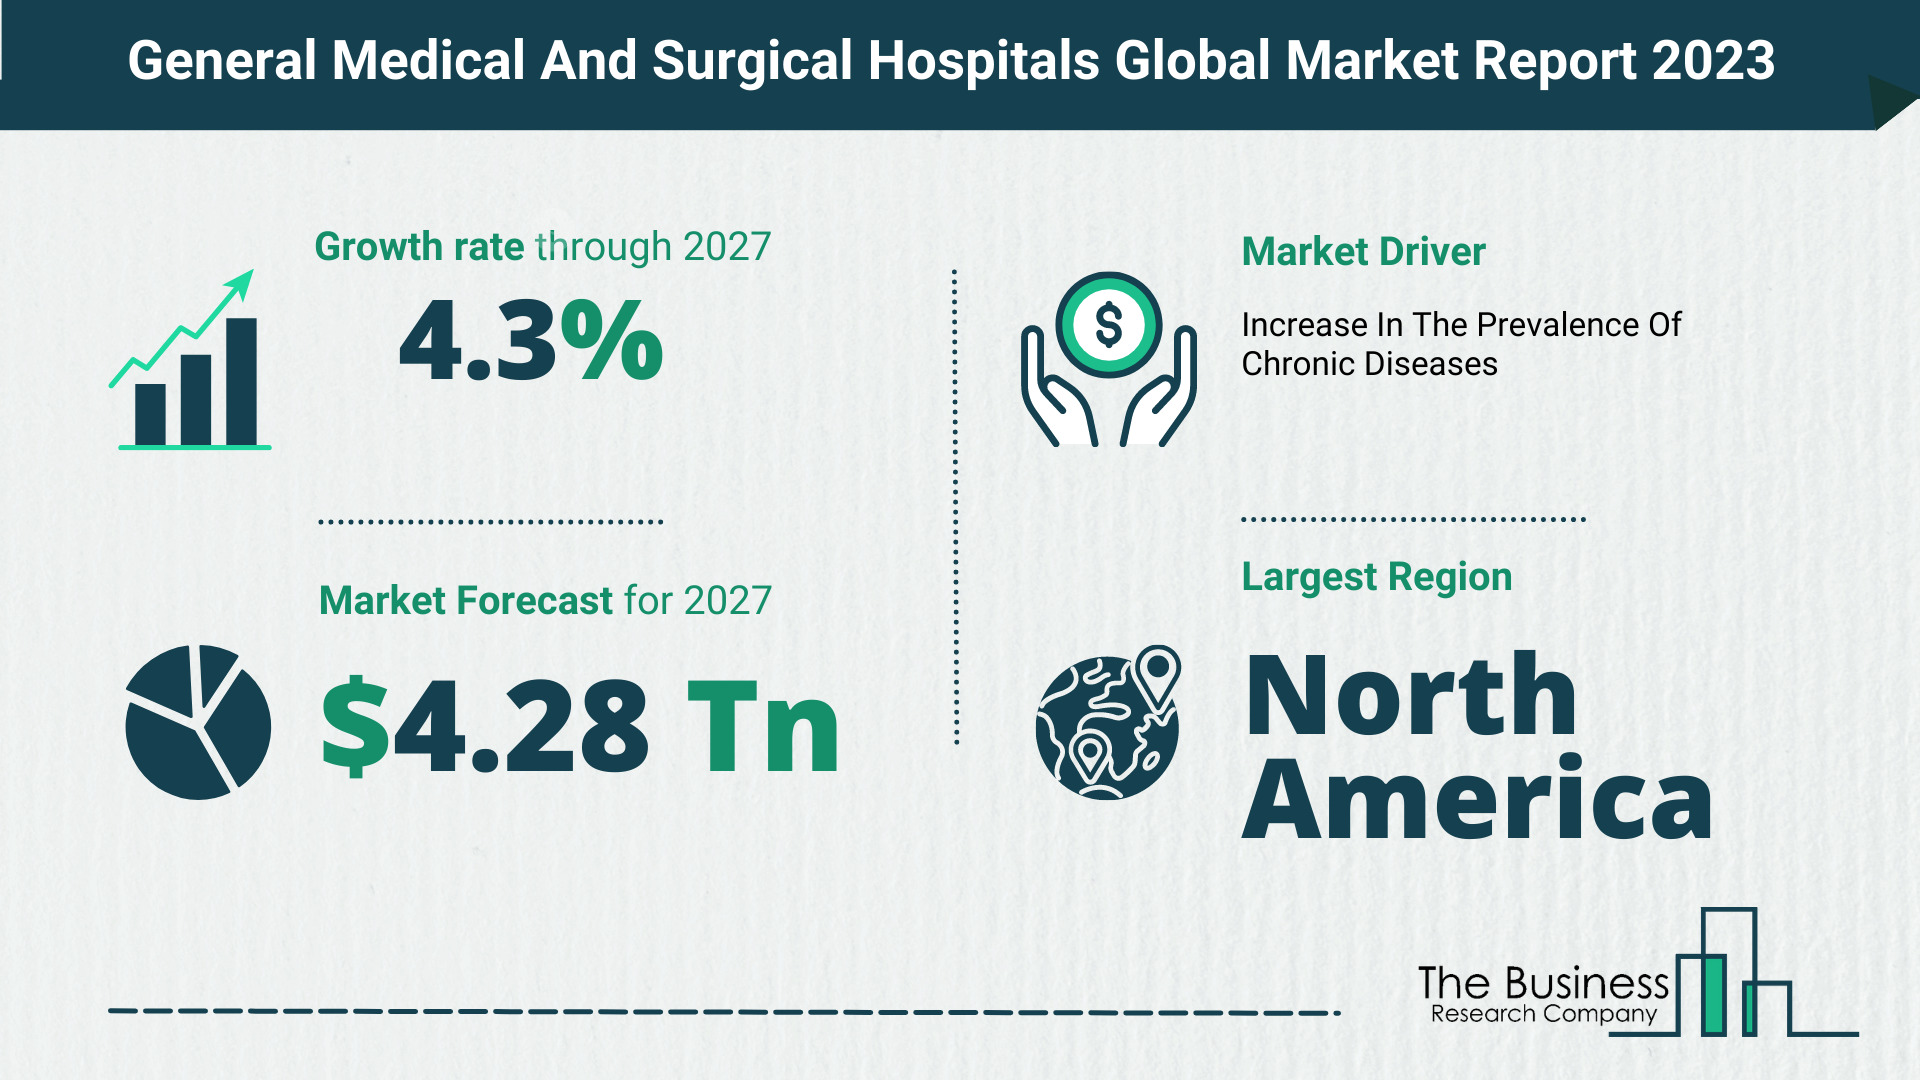 How Will The General Medical And Surgical Hospitals Market Globally Expand In 2023?